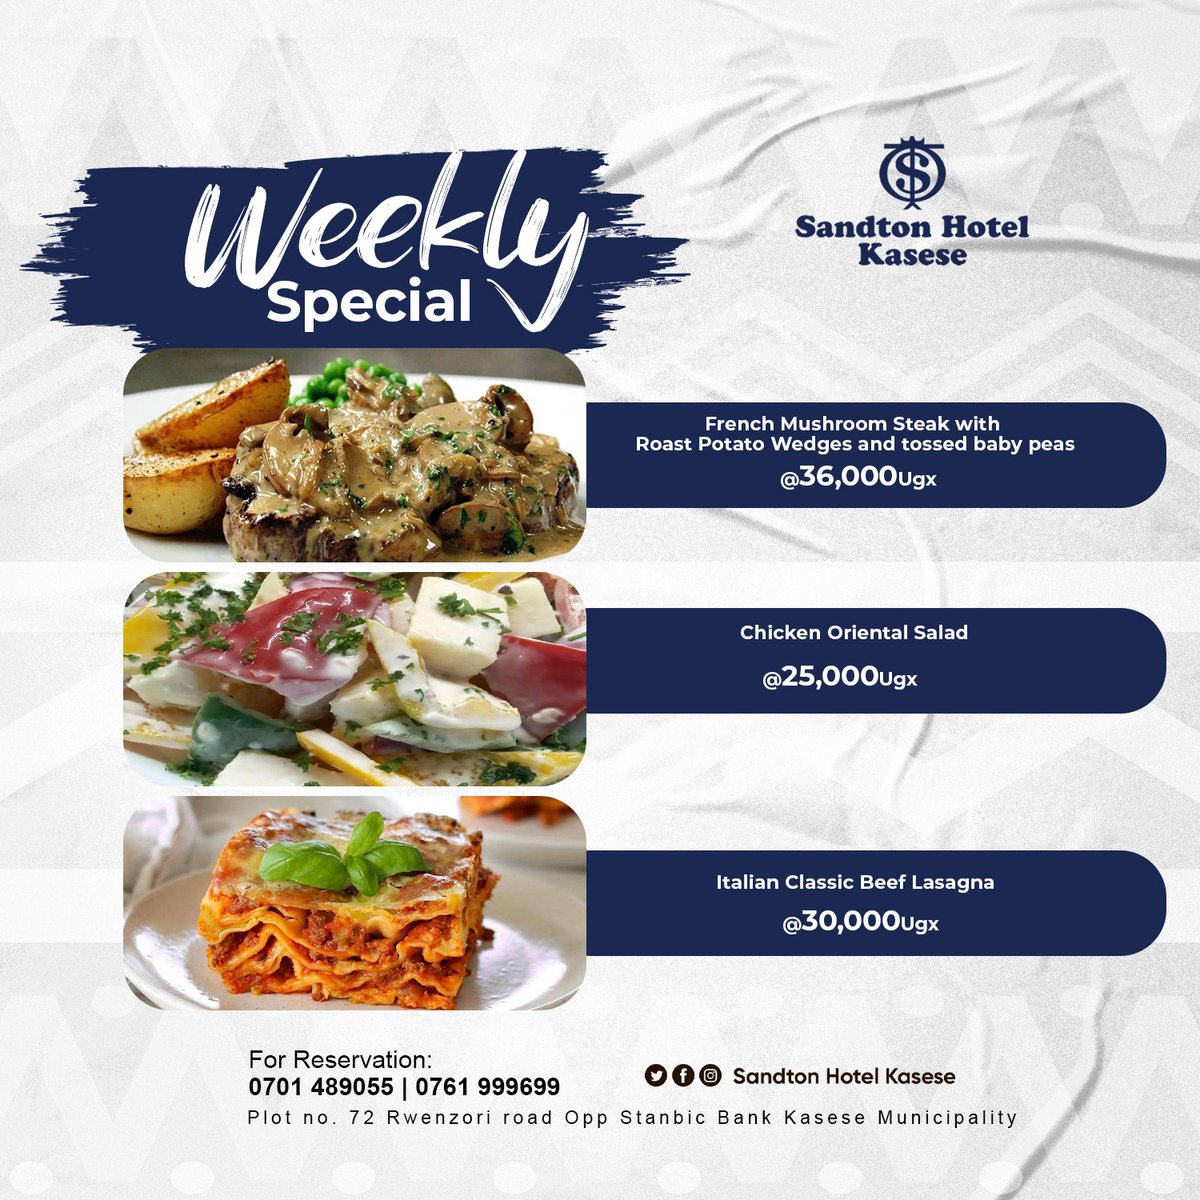 When you visit us, always ask for the week's special meal. There is a variety to choose from.
You will be wowed!